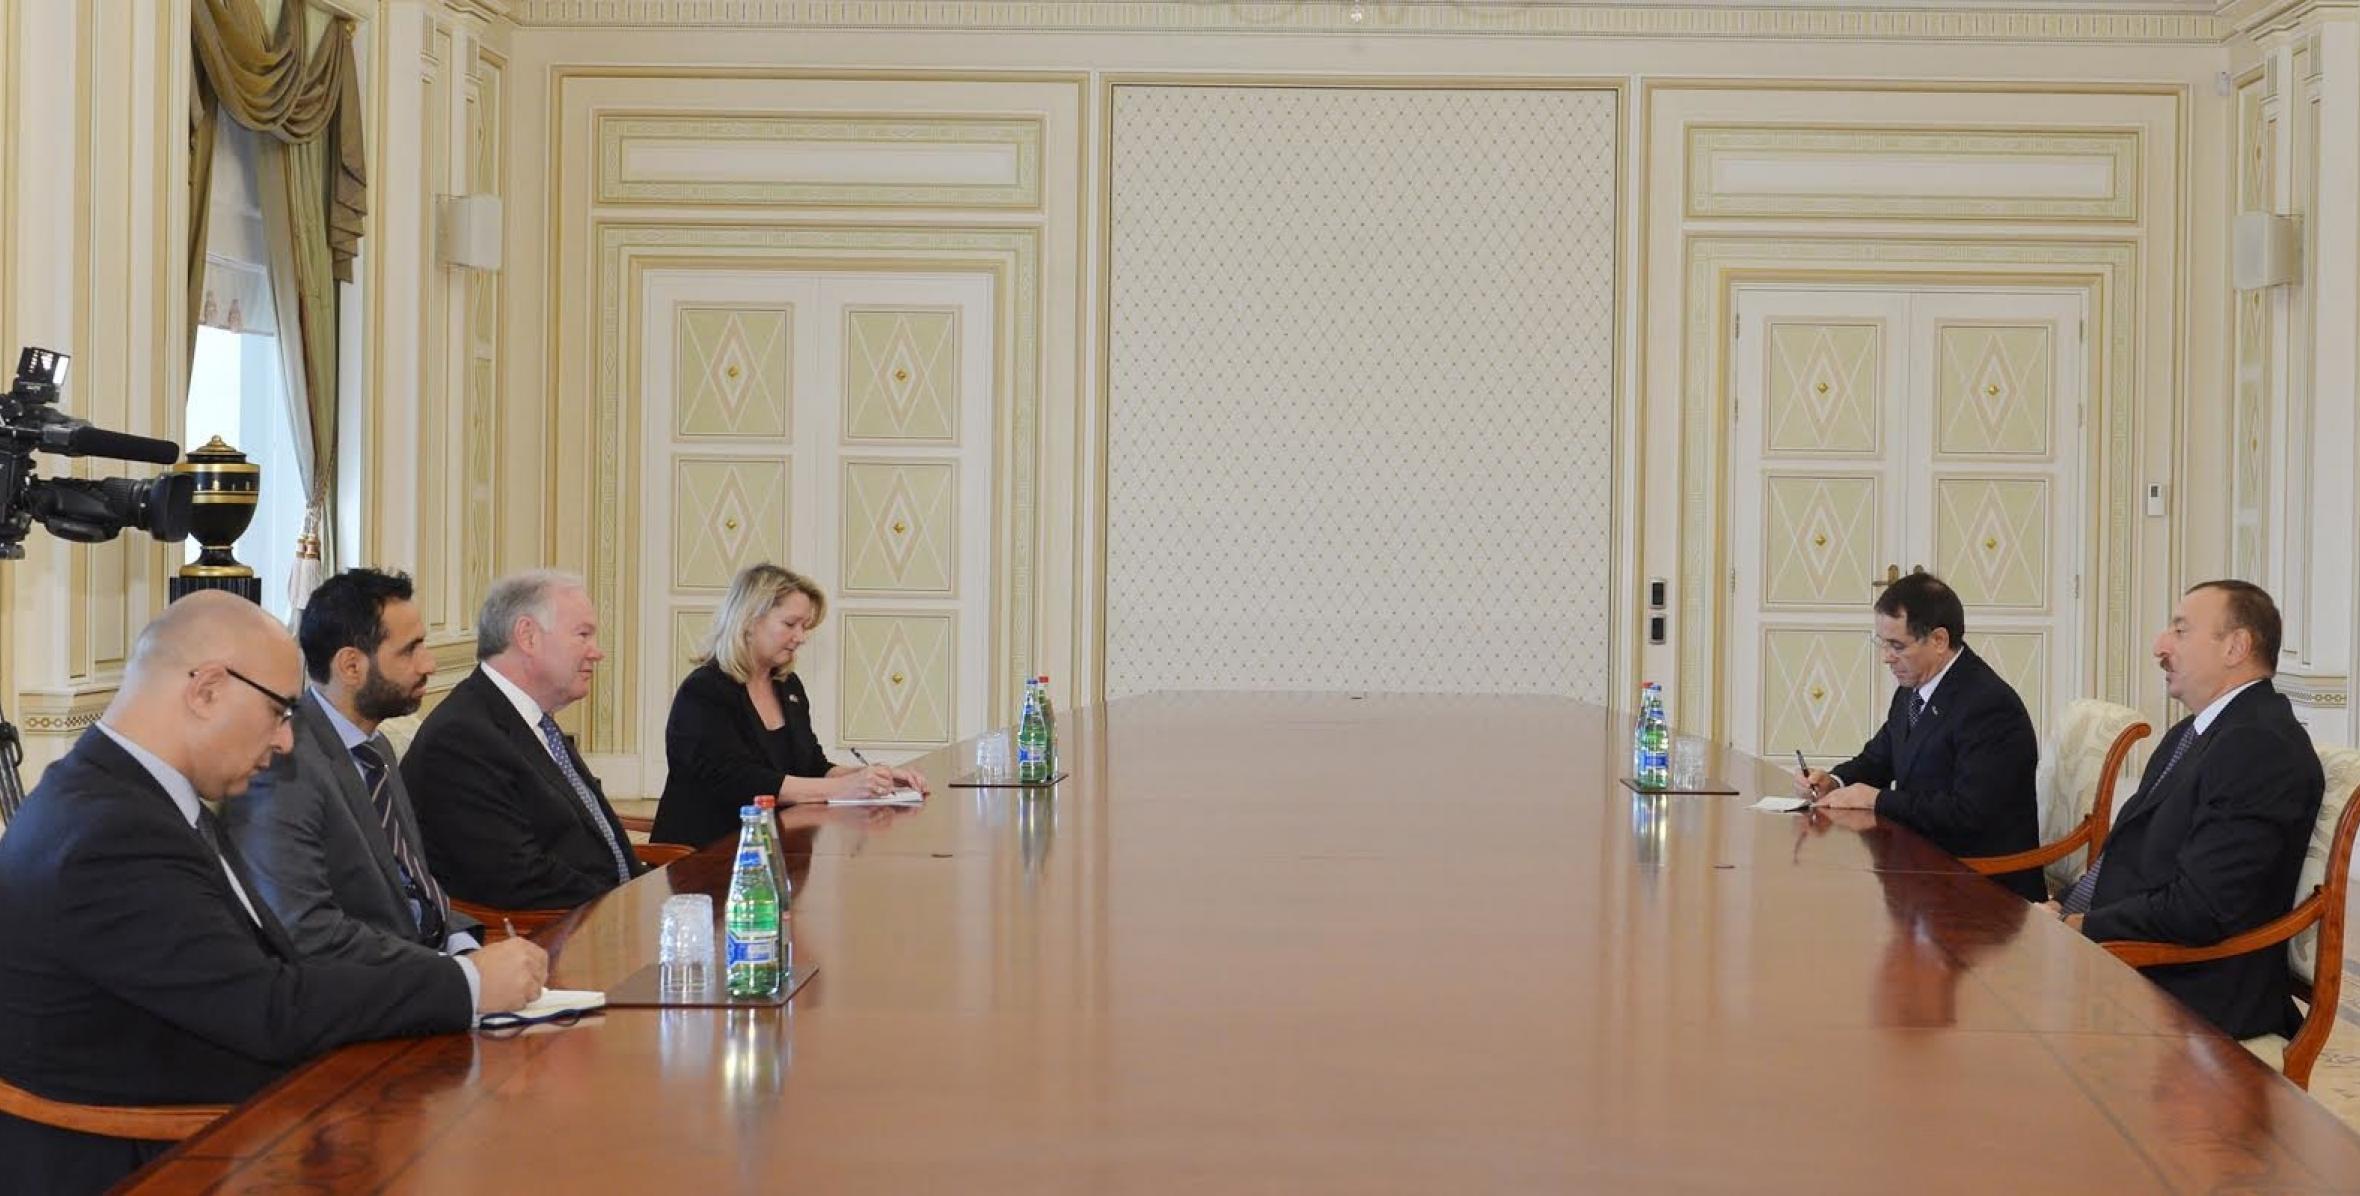 Ilham Aliyev received a member of the British Parliament and the Prime Minister’s Trade Envoy to Azerbaijan, Kazakhstan and Turkmenistan